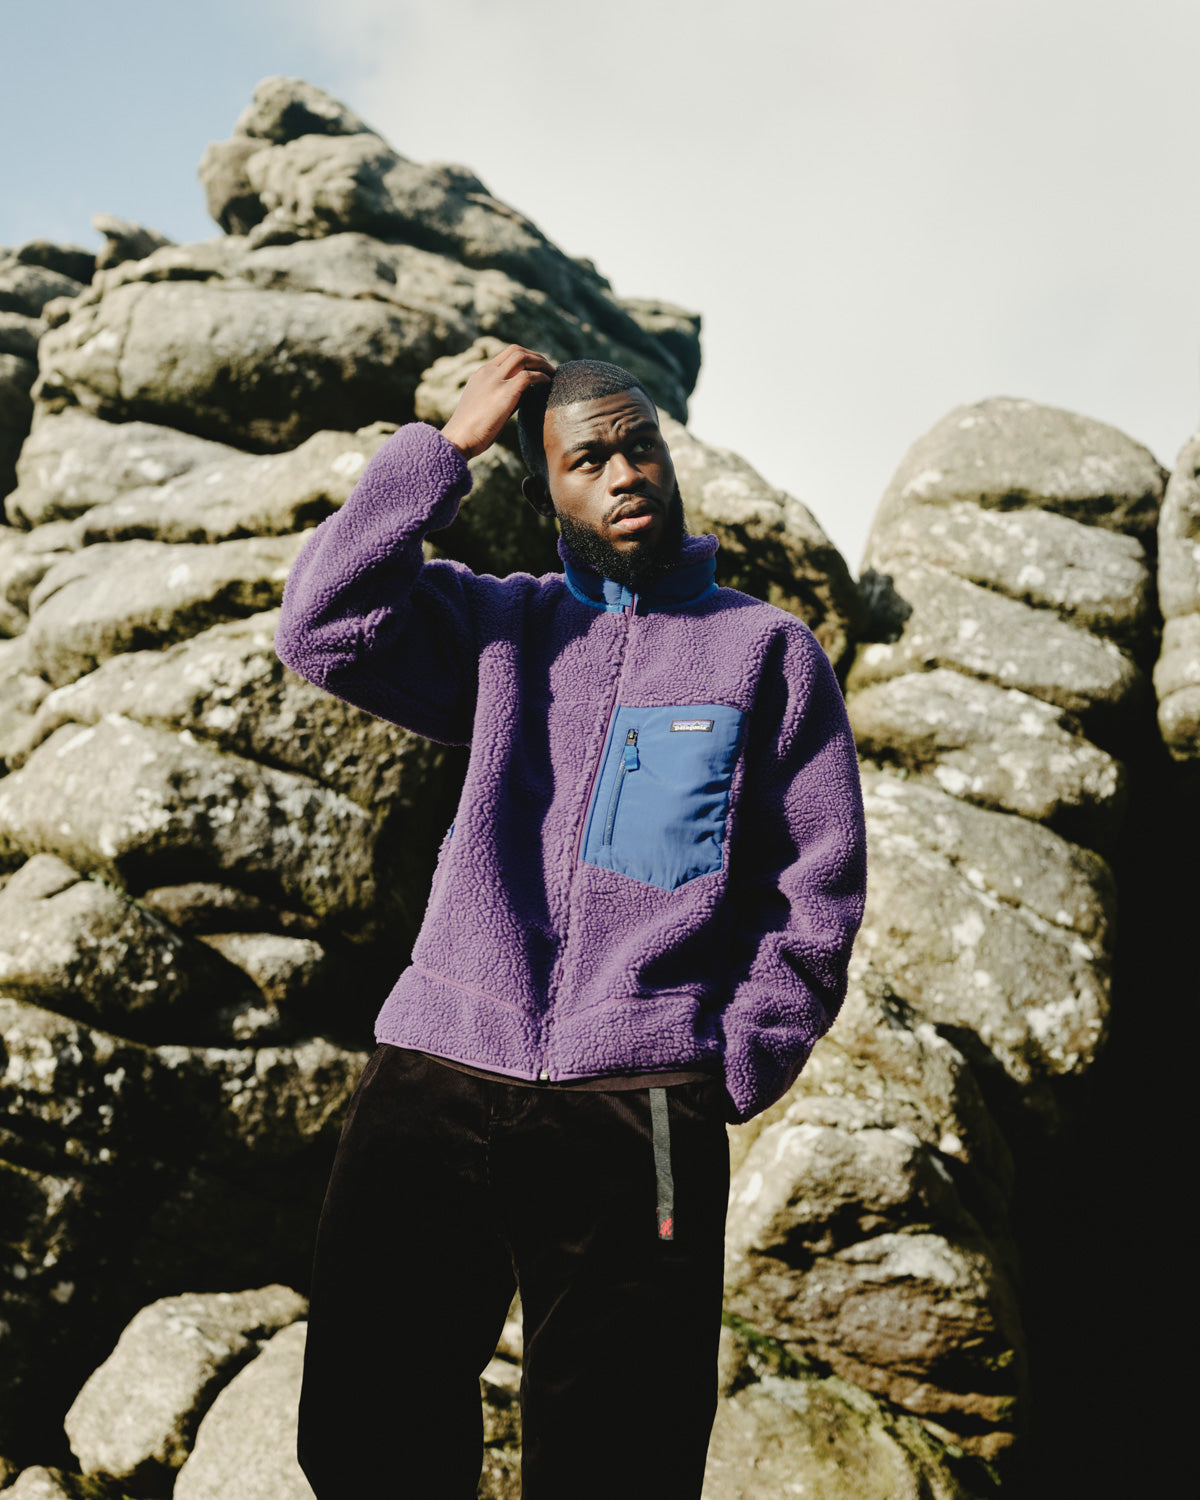 Patagonia Jackets & Fleeces Editorial AW20 | Always in Colour